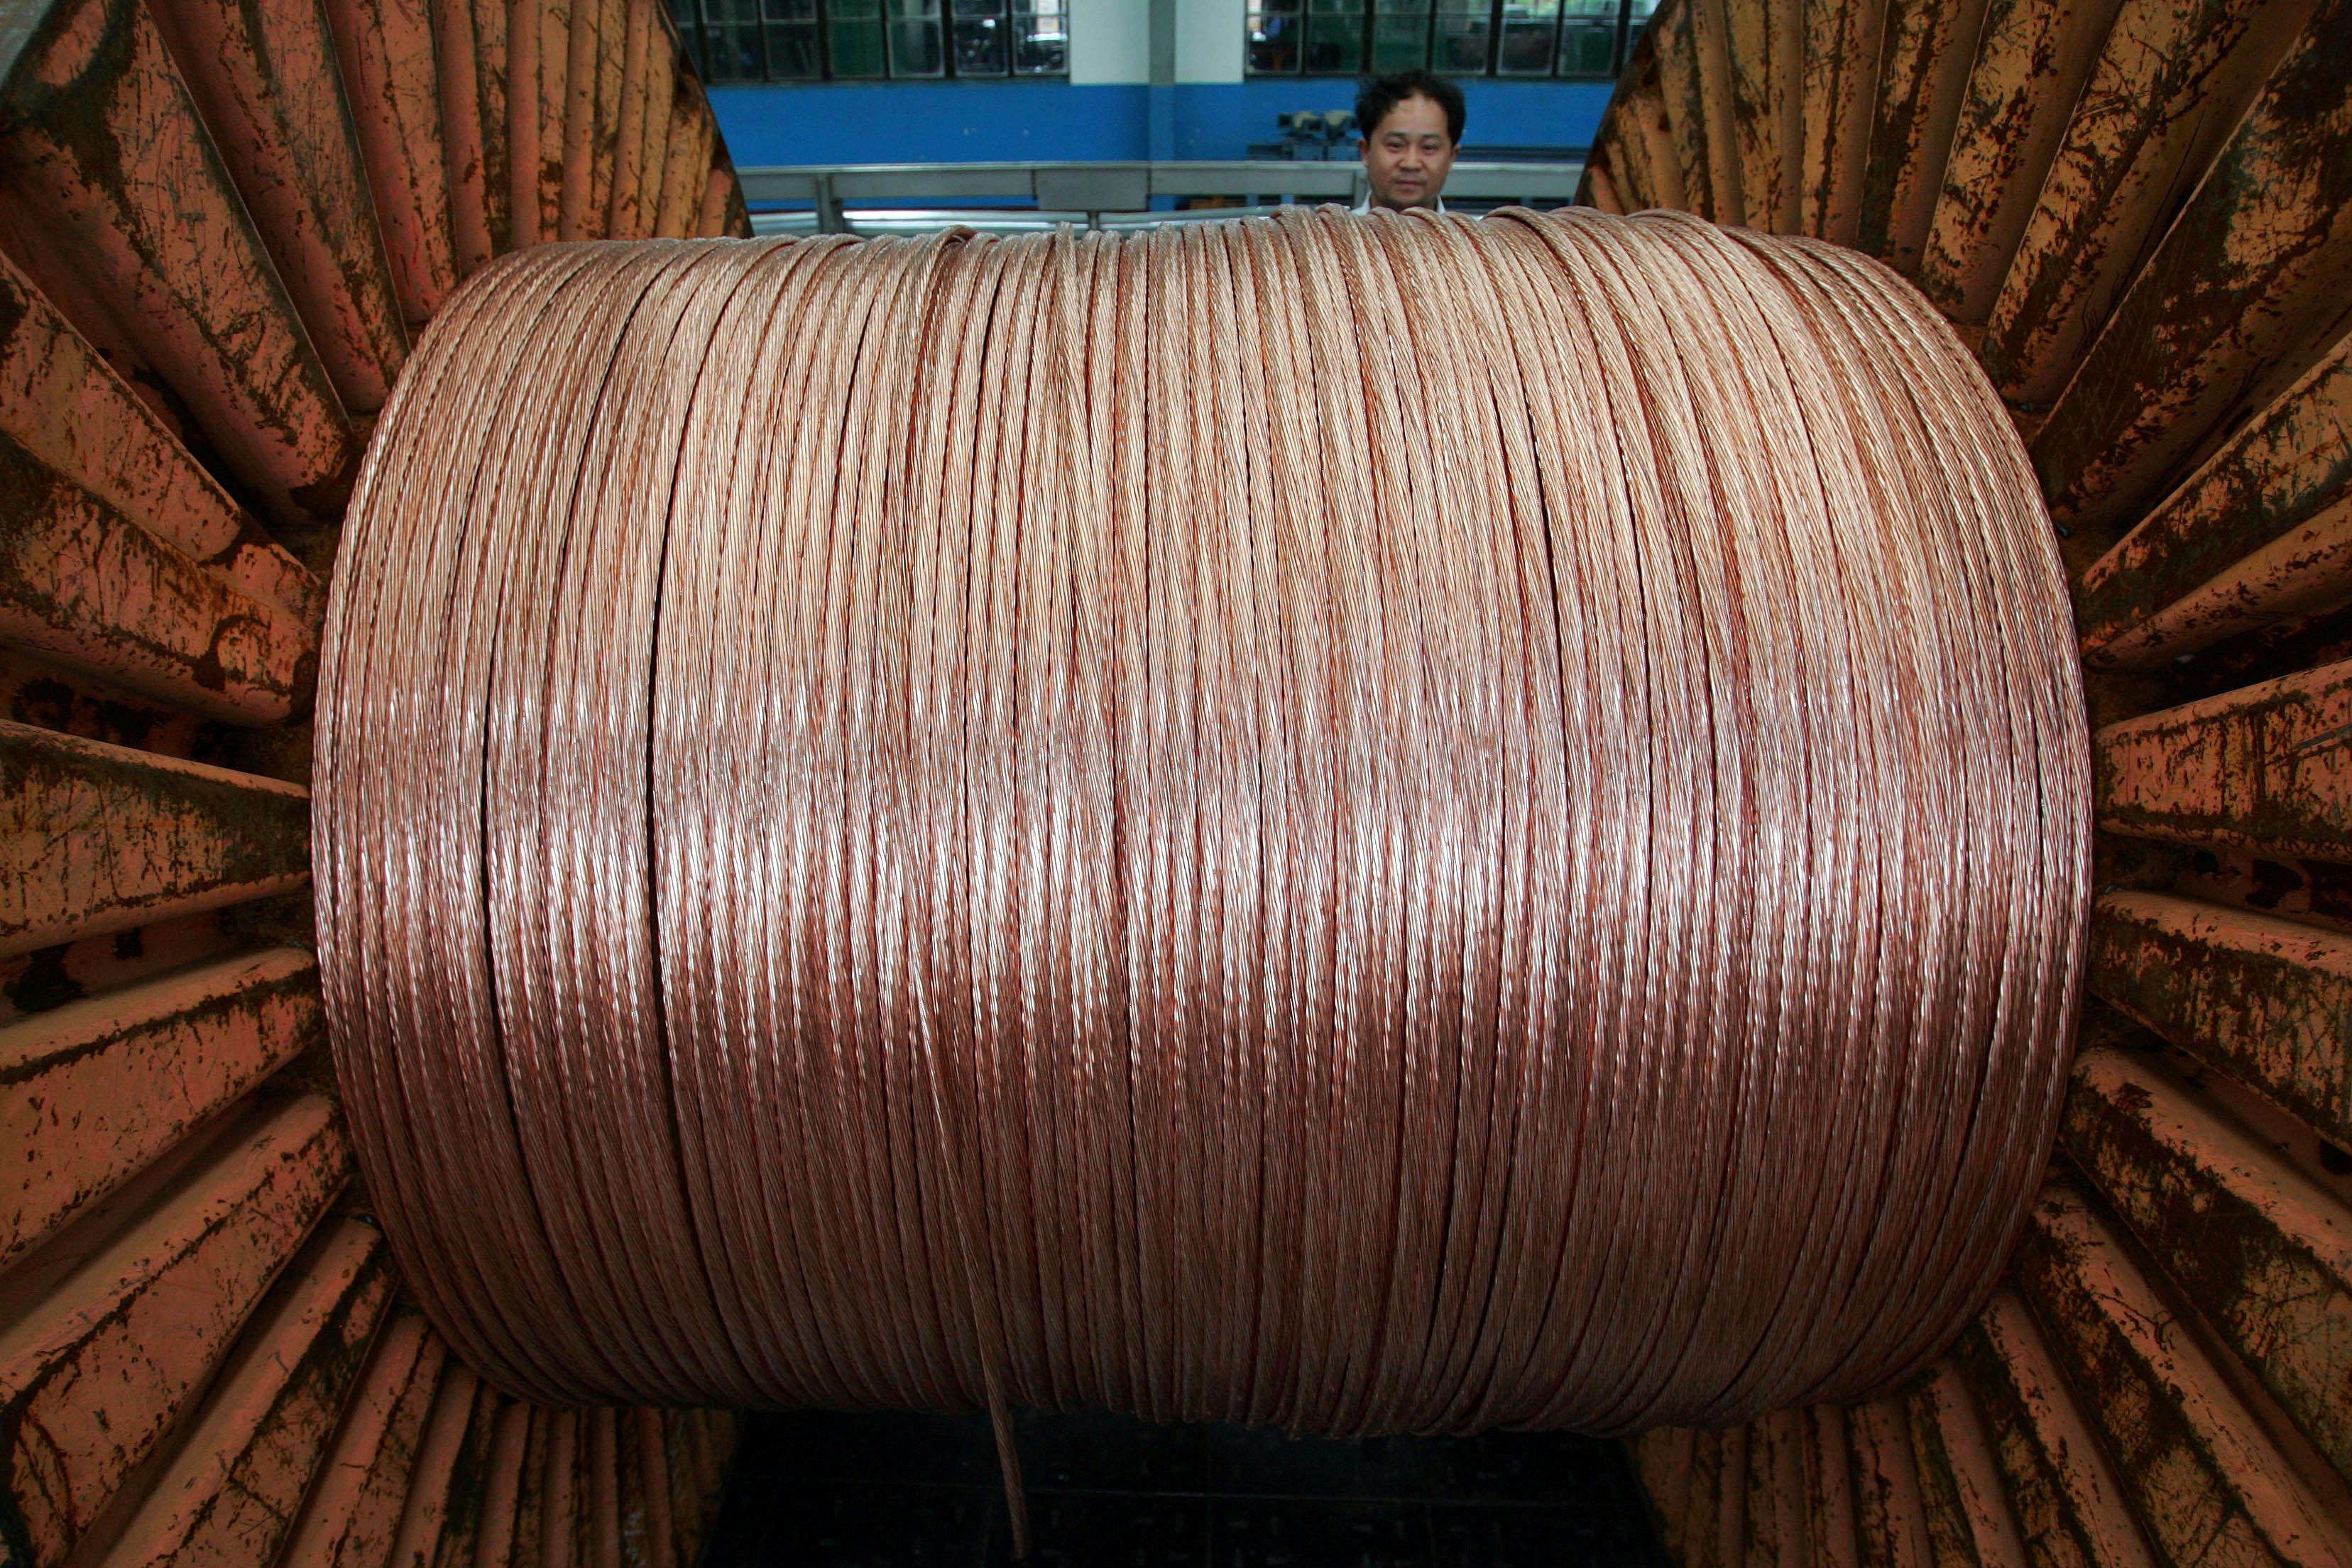 An employee works at a electricity cable factory in Baoying